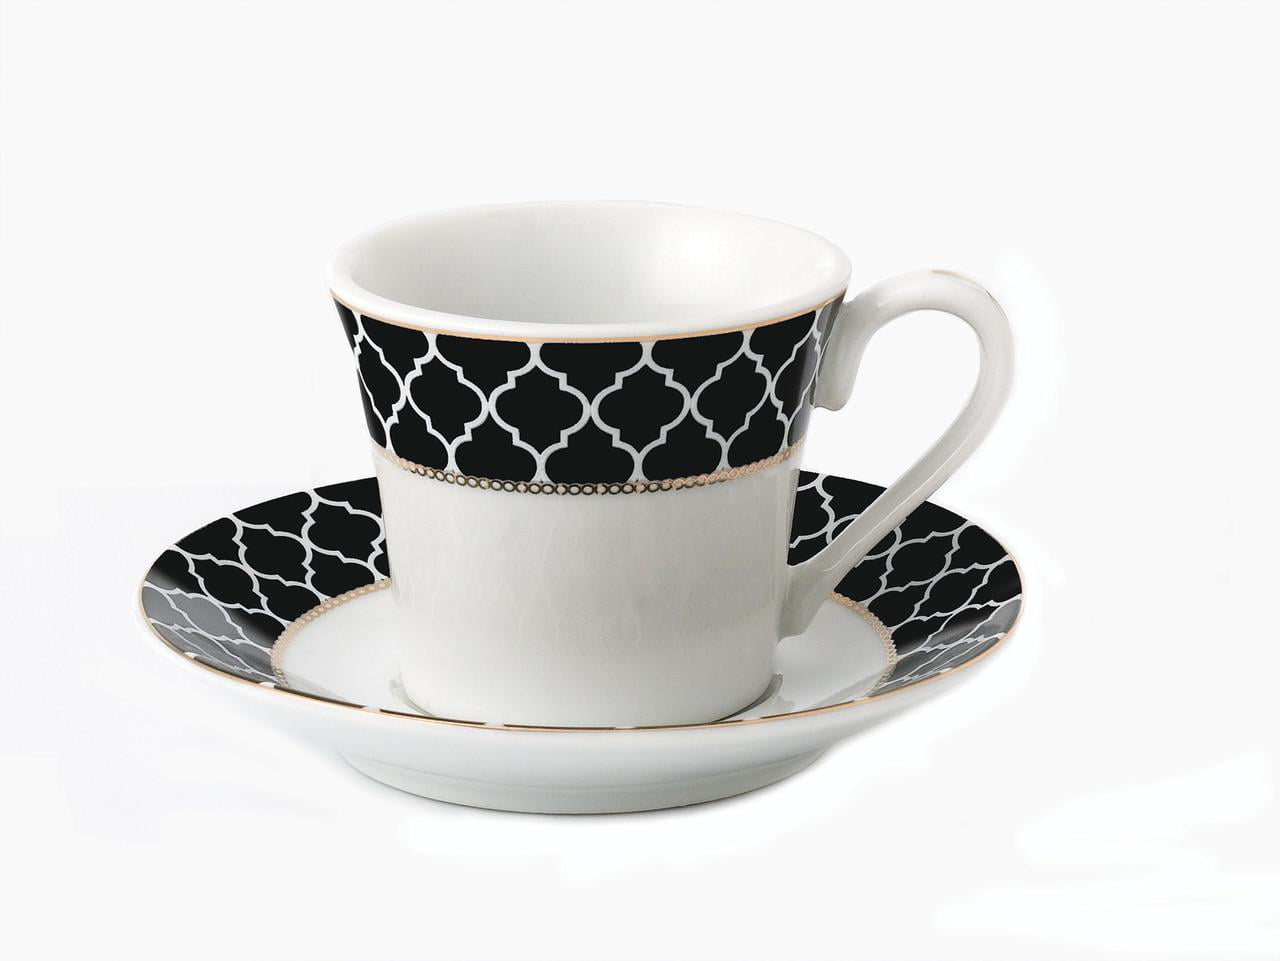 3.5 oz espresso cup with saucer - black [35B] : Splendids Dinnerware,  Wholesale Dinnerware and Glassware for Restaurant and Home